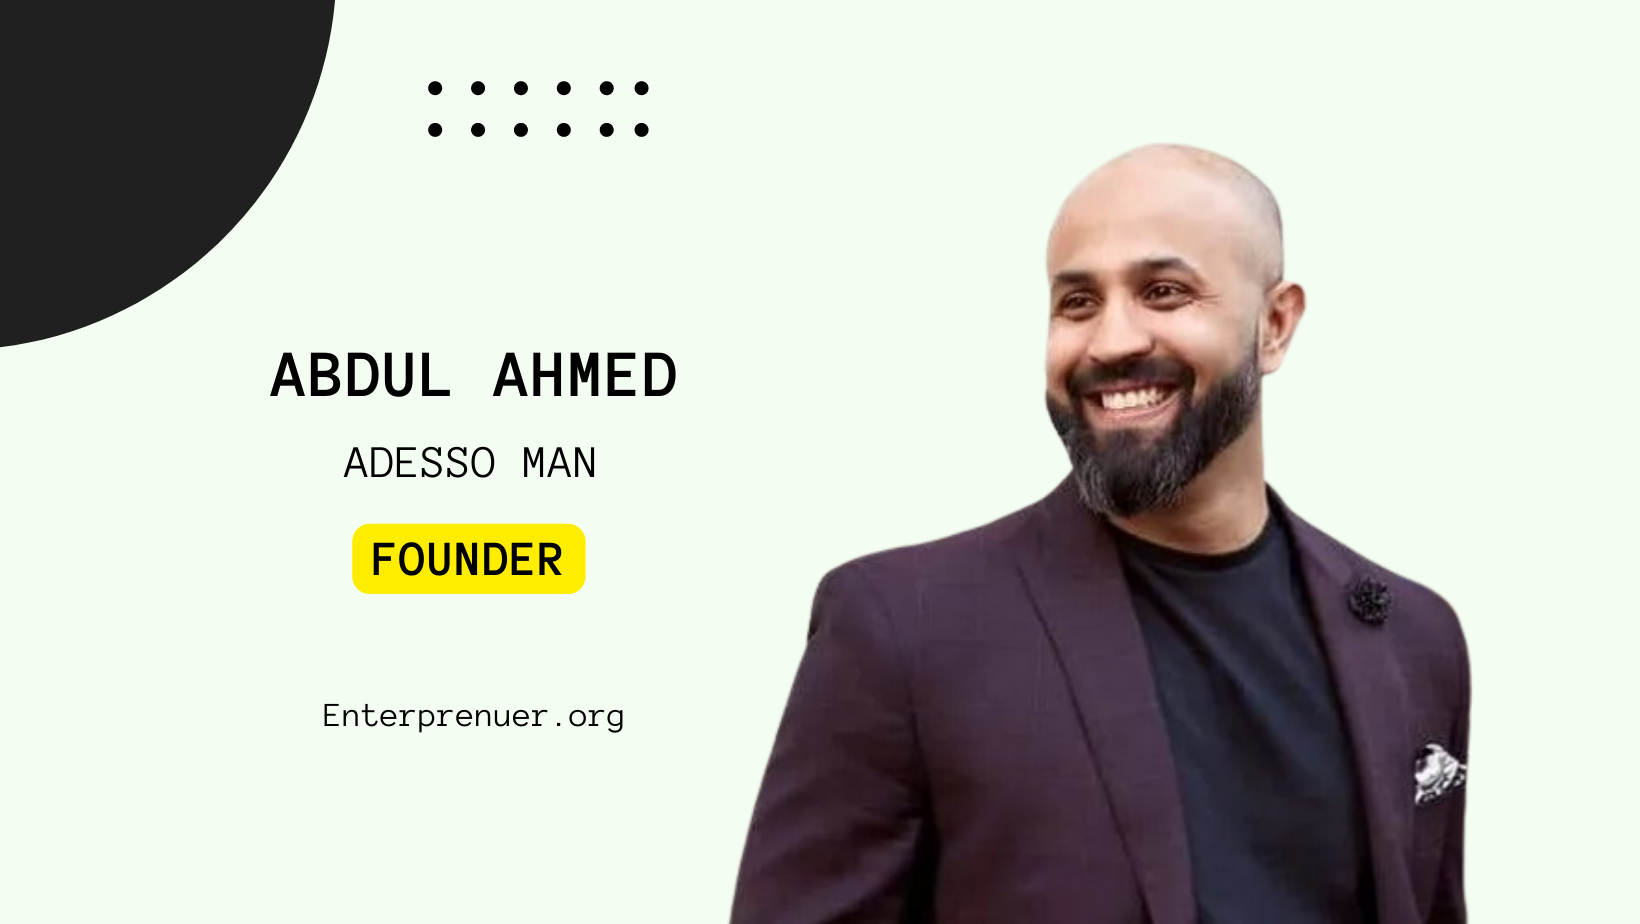 Meet Abdul Ahmed CEO of Adesso Man